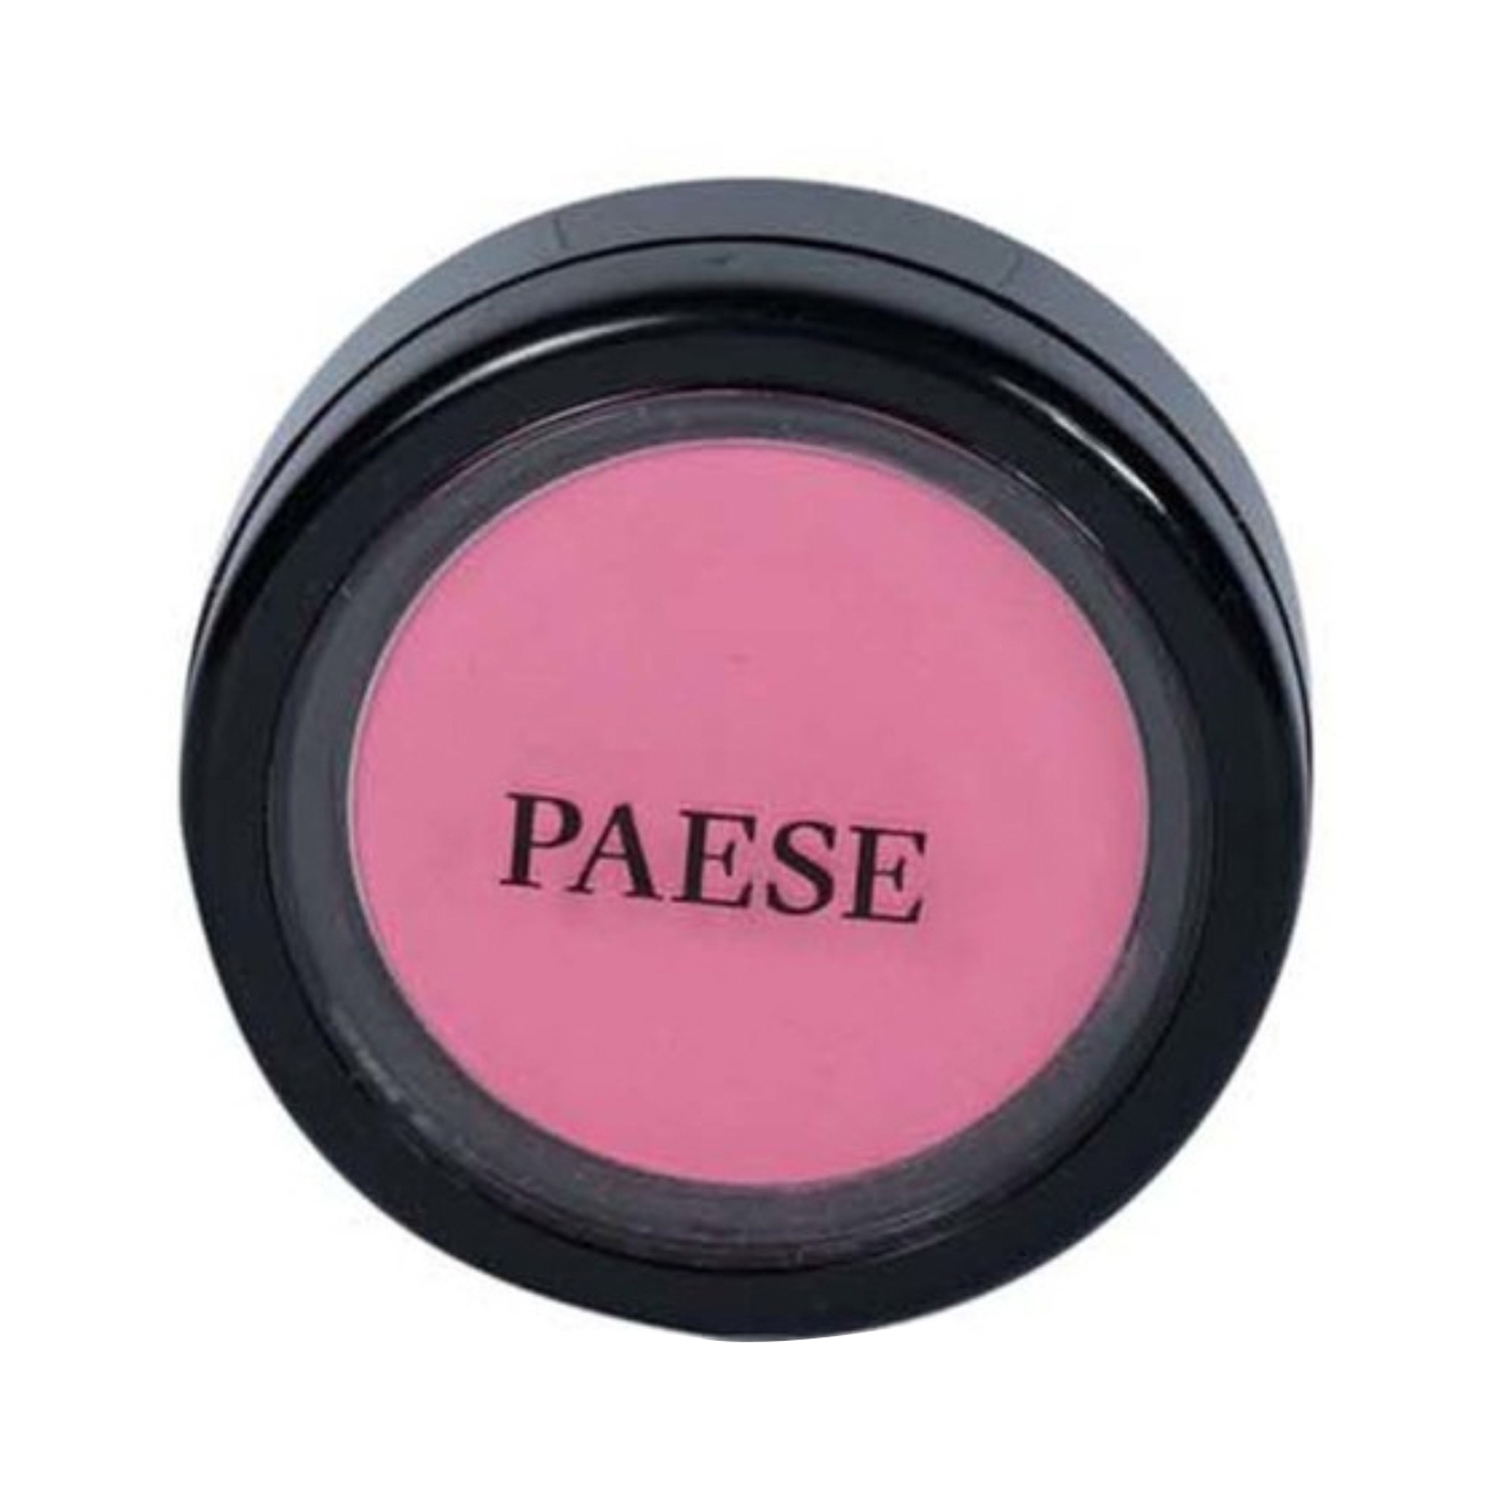 Paese Cosmetics | Paese Cosmetics Blush With Argan Oil - 61 (3g)